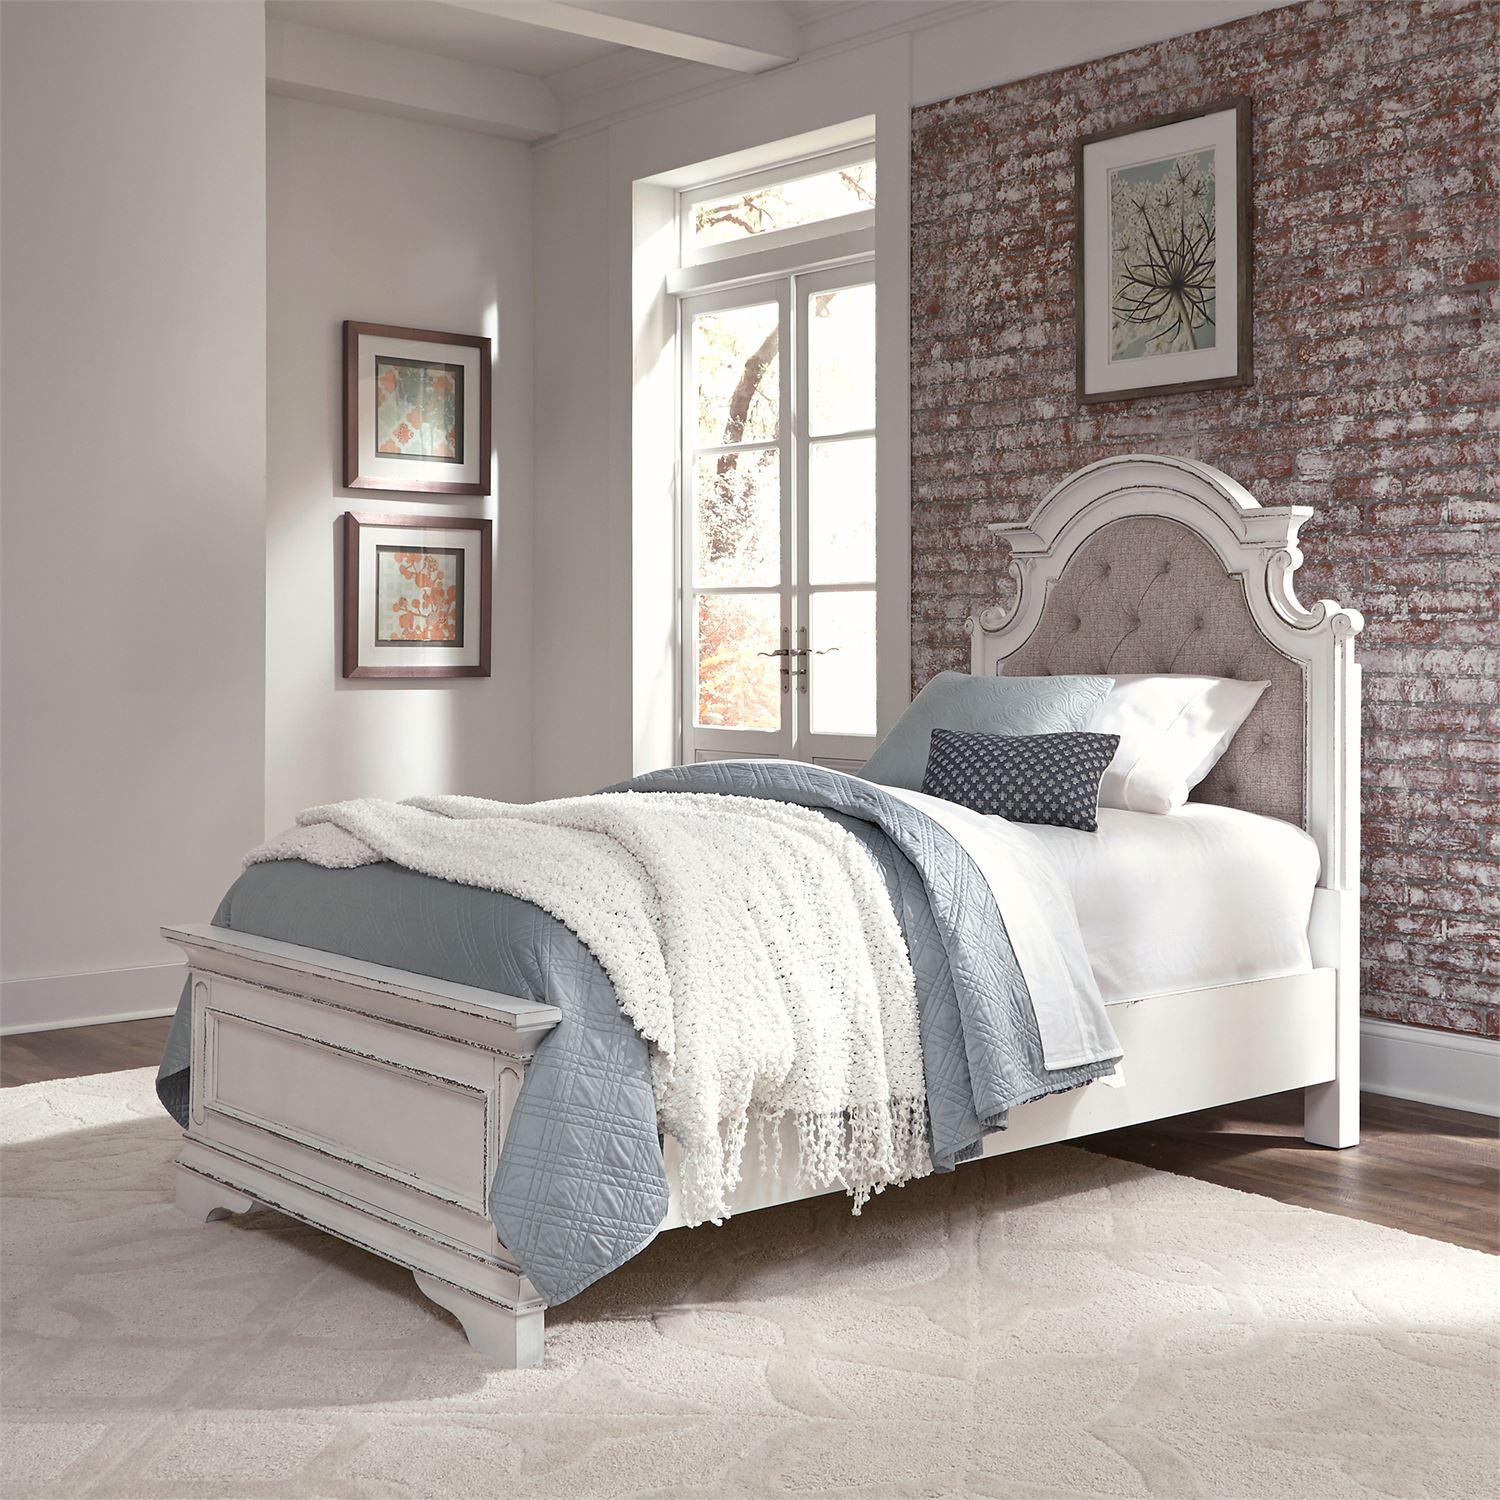 European Traditional Upholstered Bed Magnolia Manor  (244-YBR) Upholstered  Bed 244-YBR-FUB in White Chenille